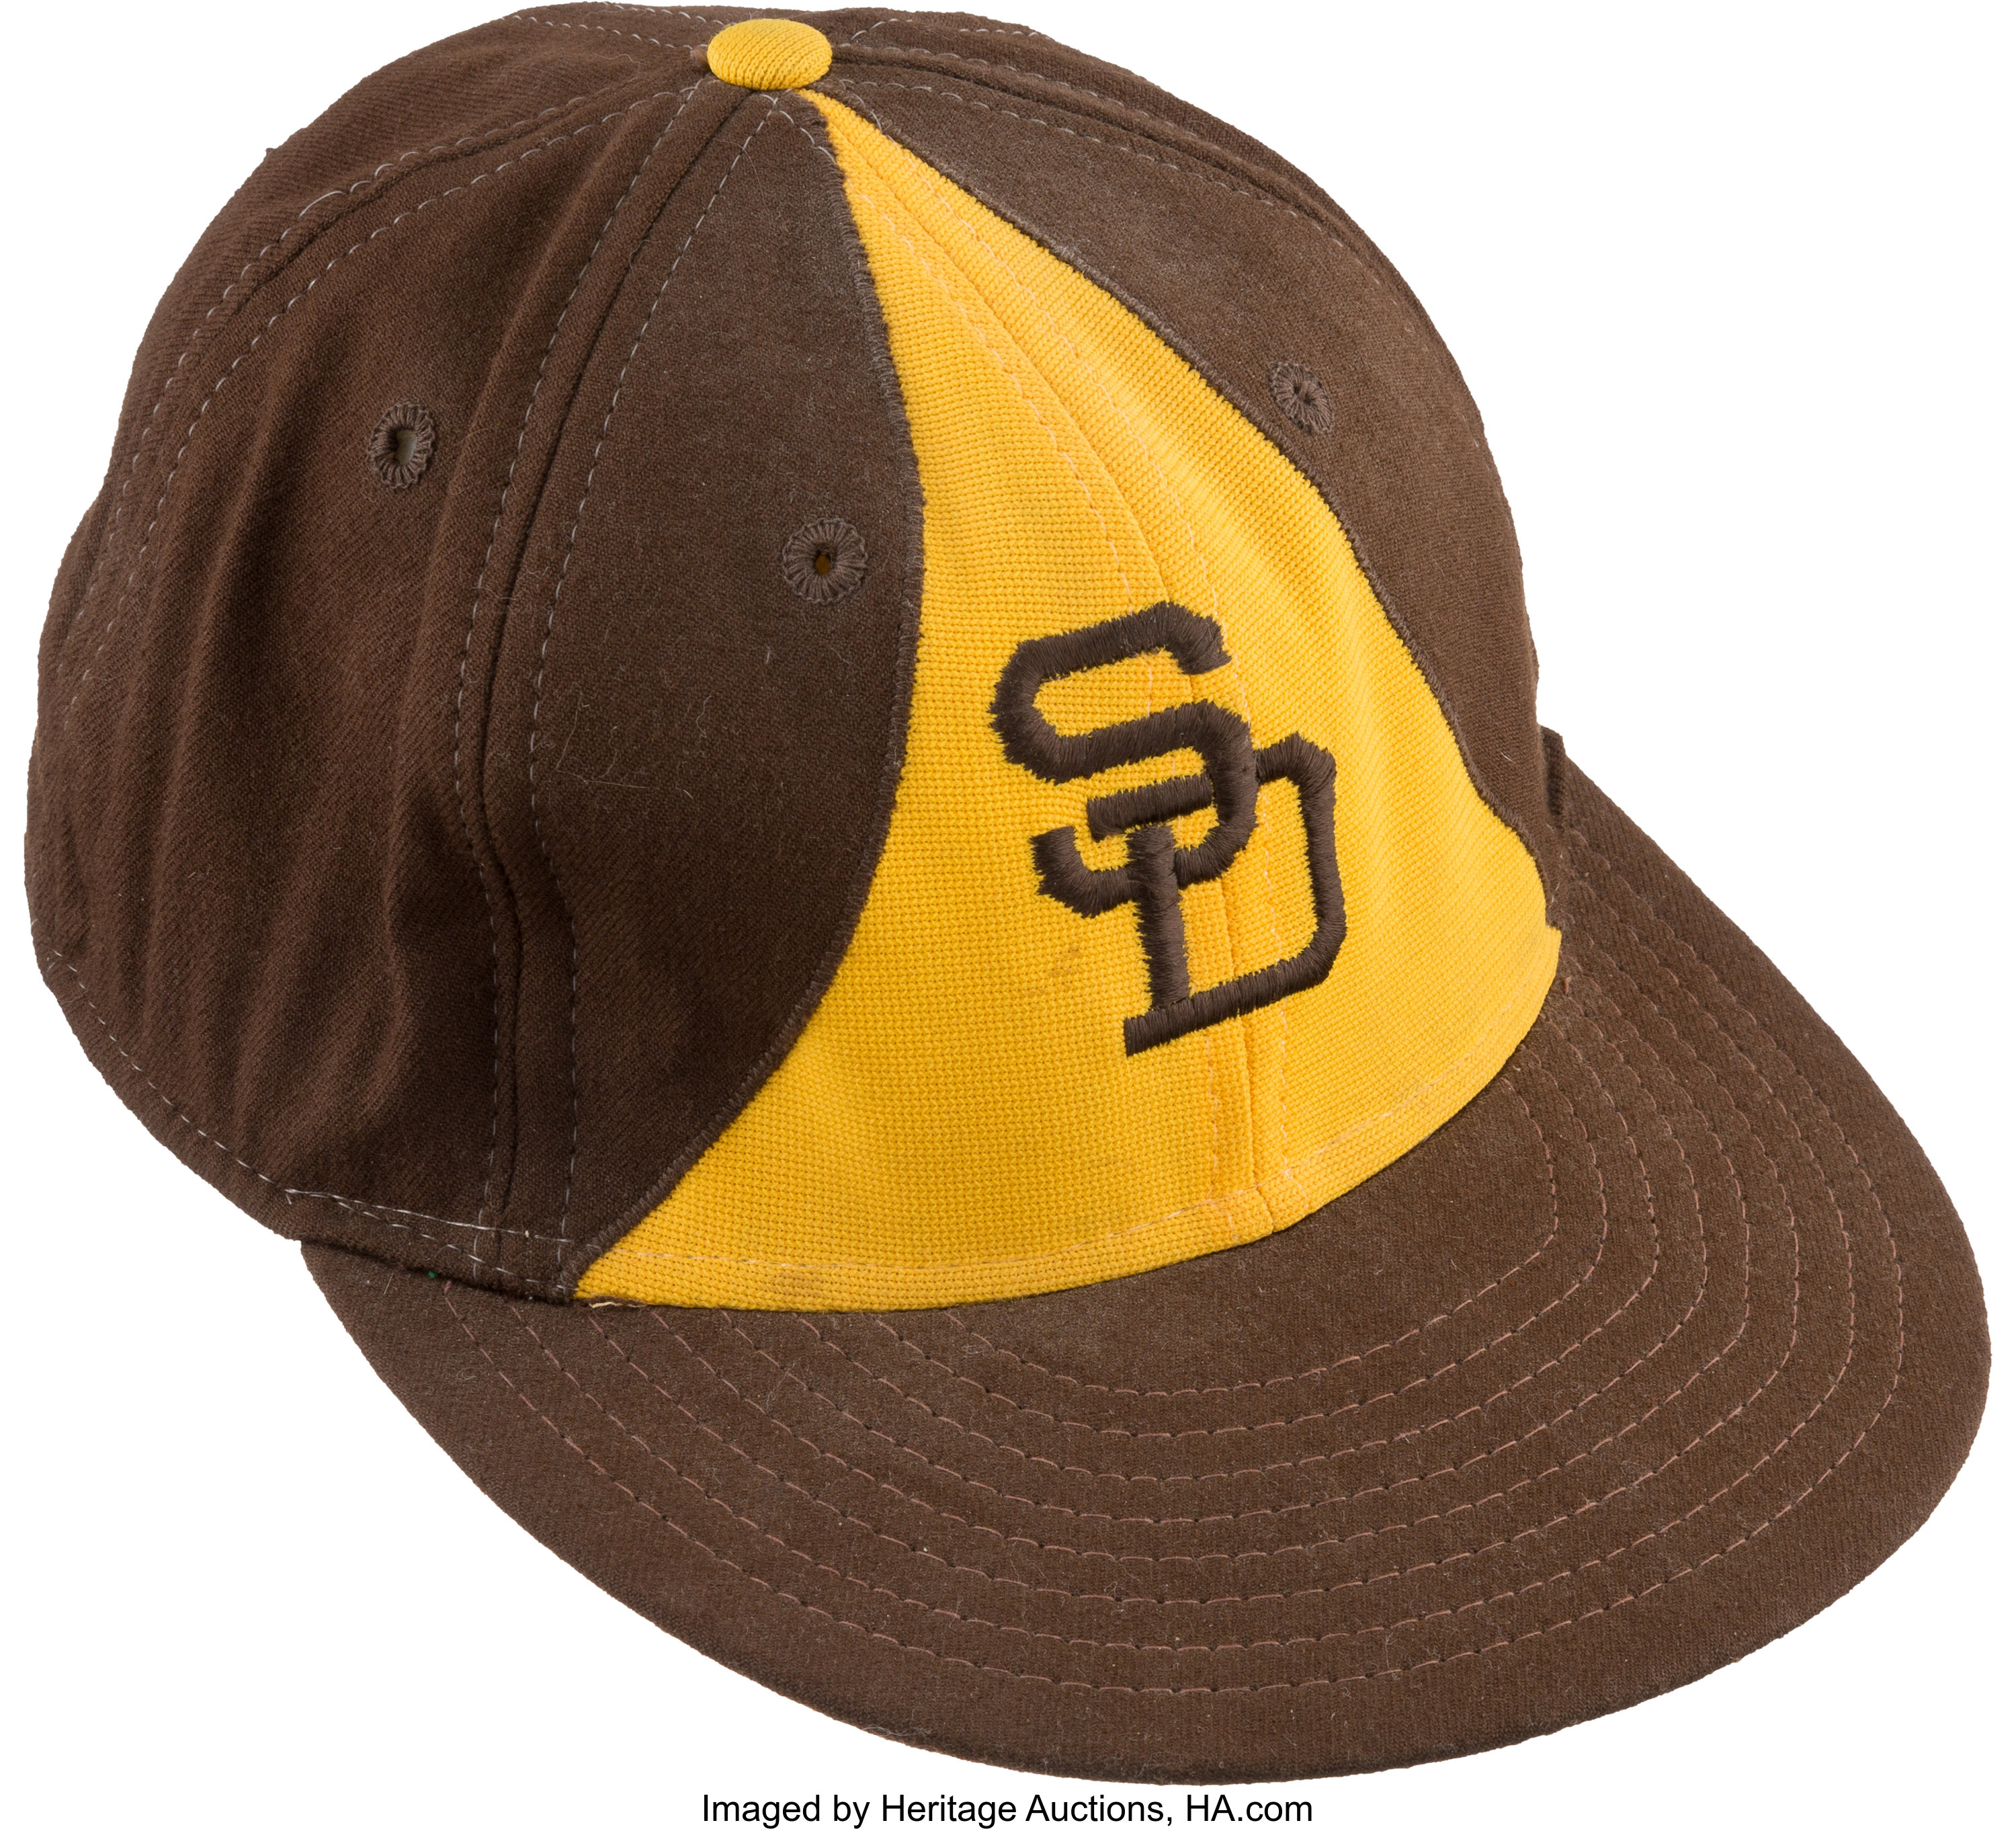 Sold at Auction: San Diego Padres 1969-70 Wilson Game Worn Cap